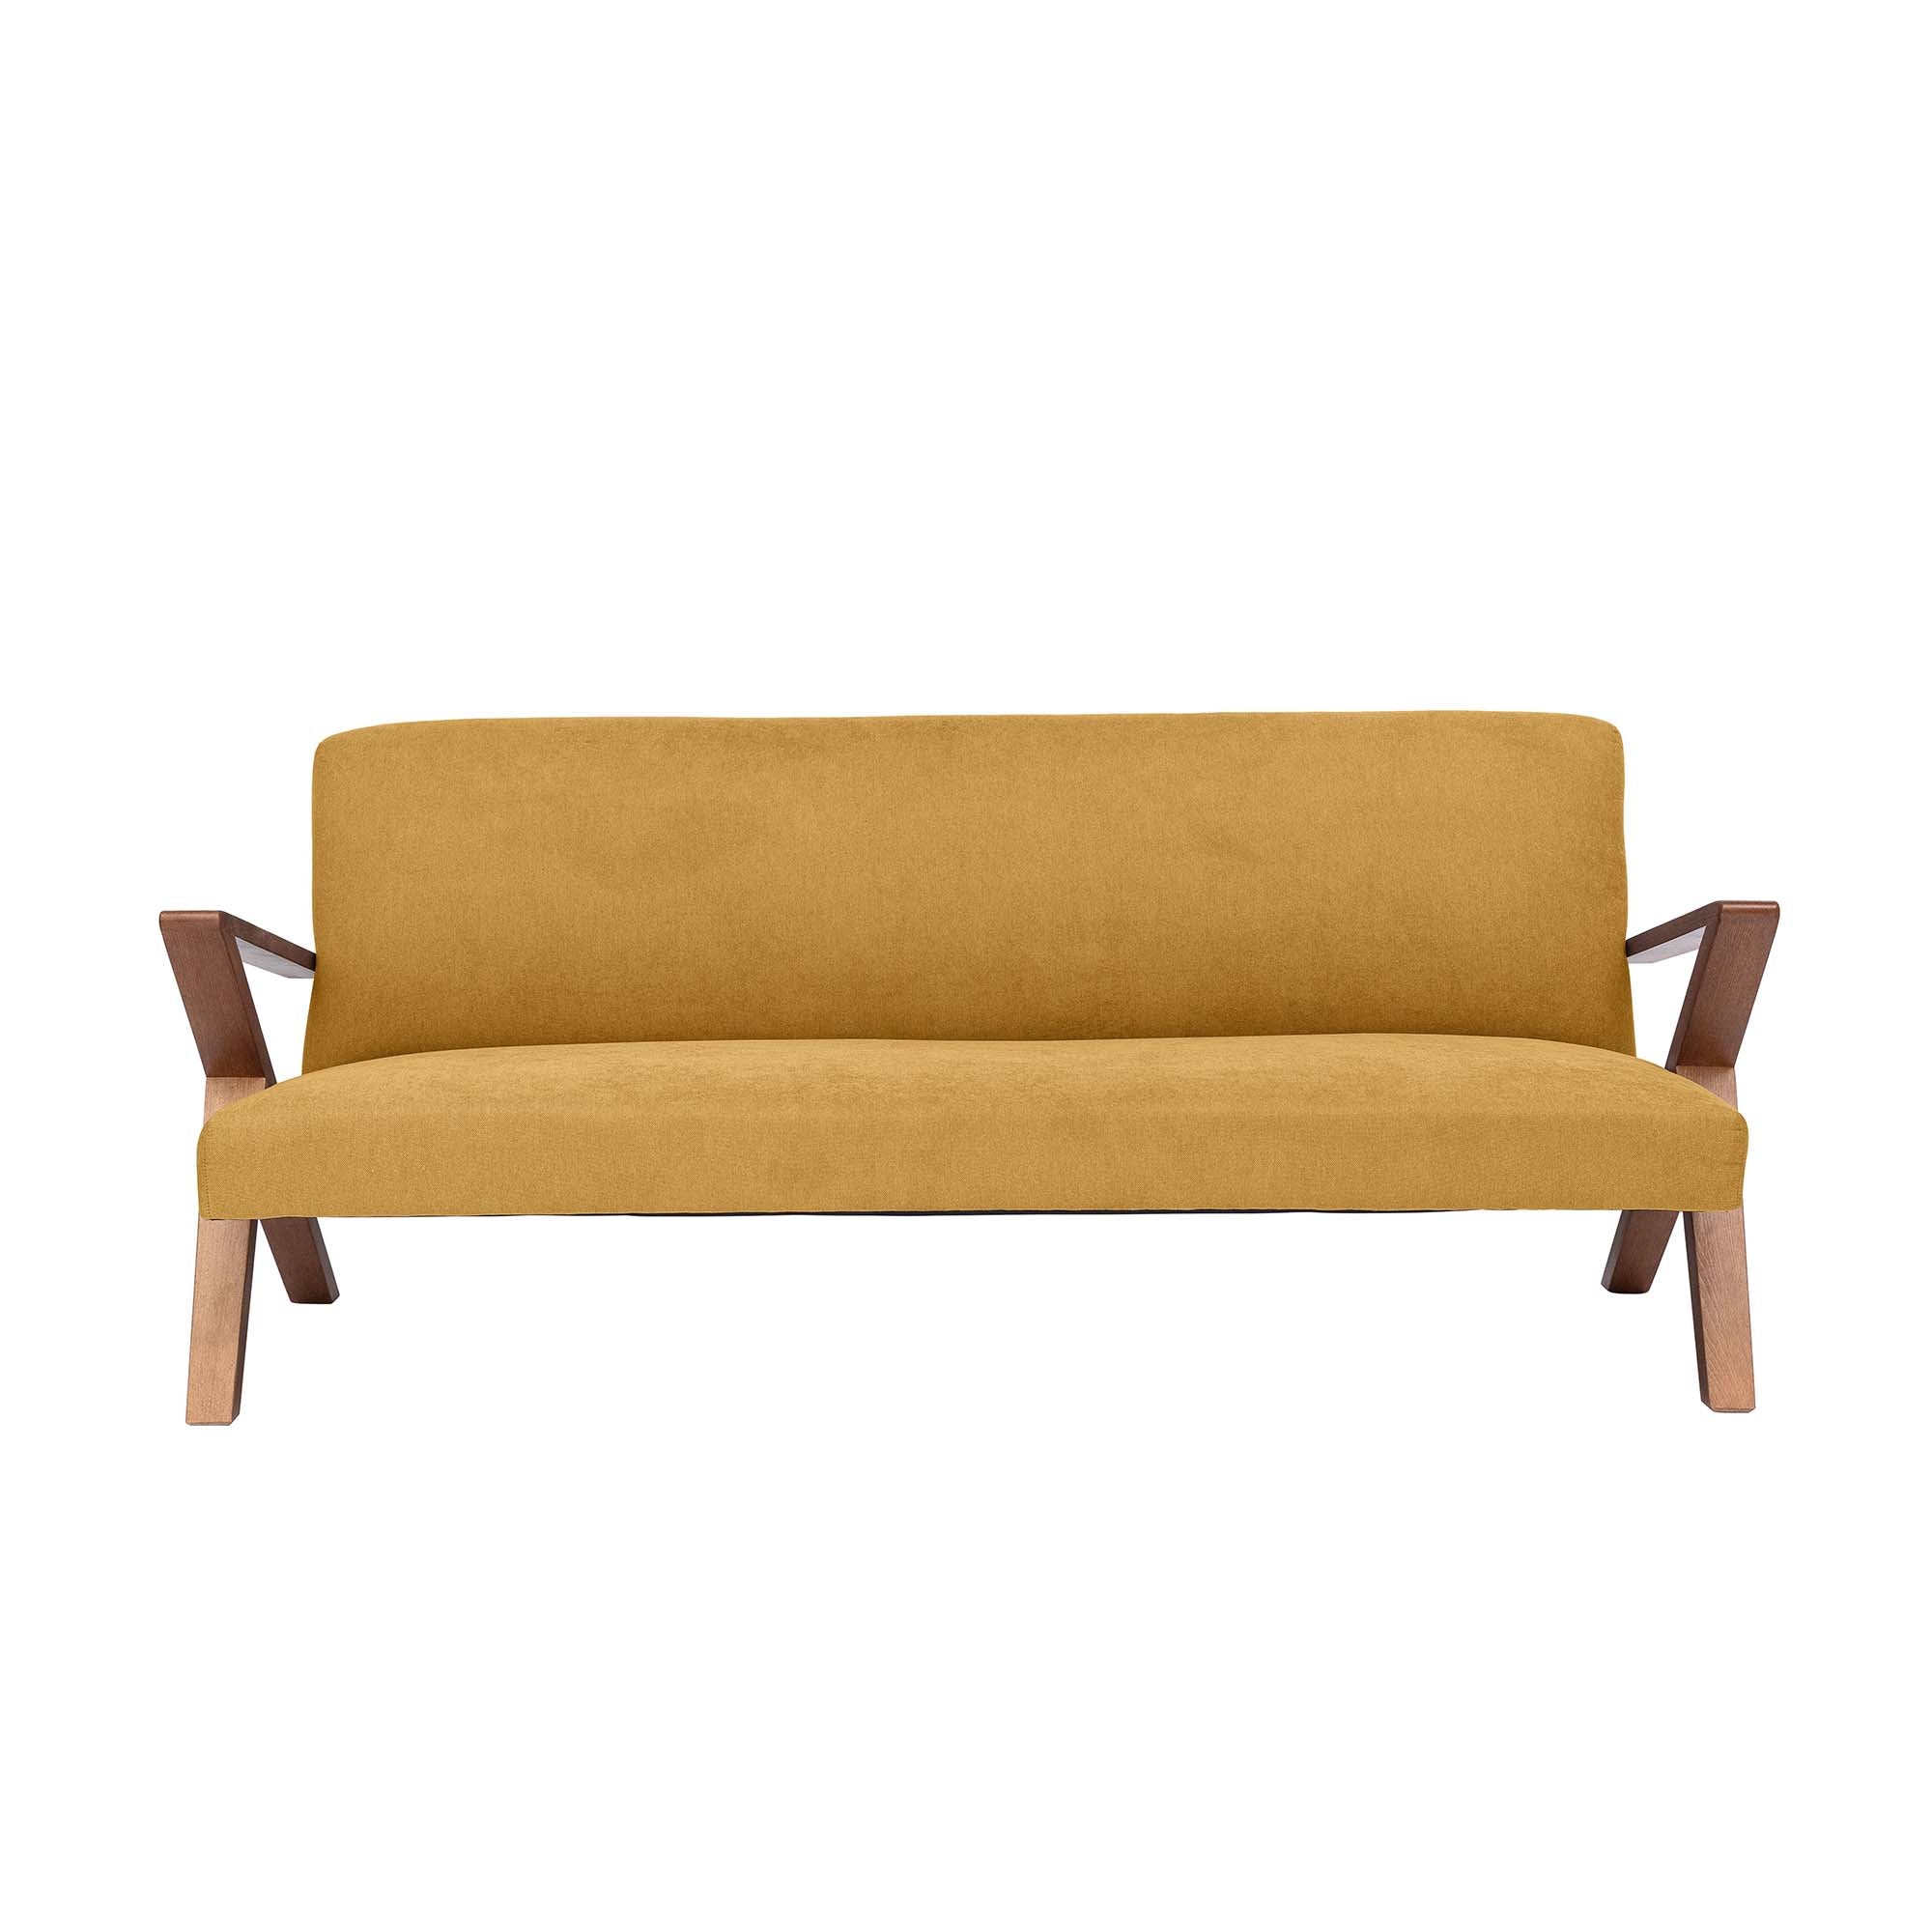  4-seater Sofa Beech Wood Frame, Walnut Colour yellow fabric, front view